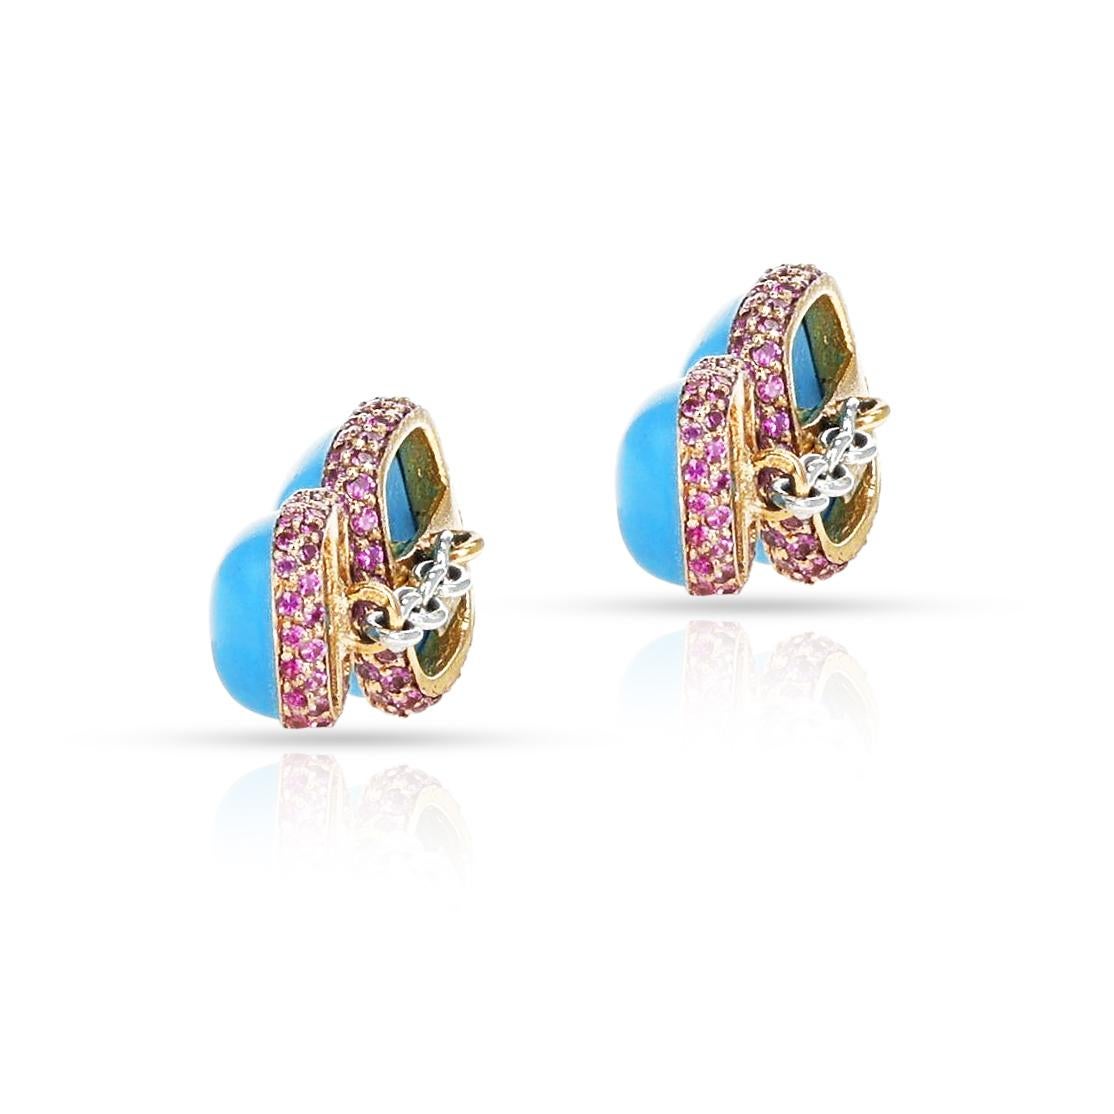 Cabochon Vita Turquoise and Pink Sapphire Cufflinks, 18k For Sale